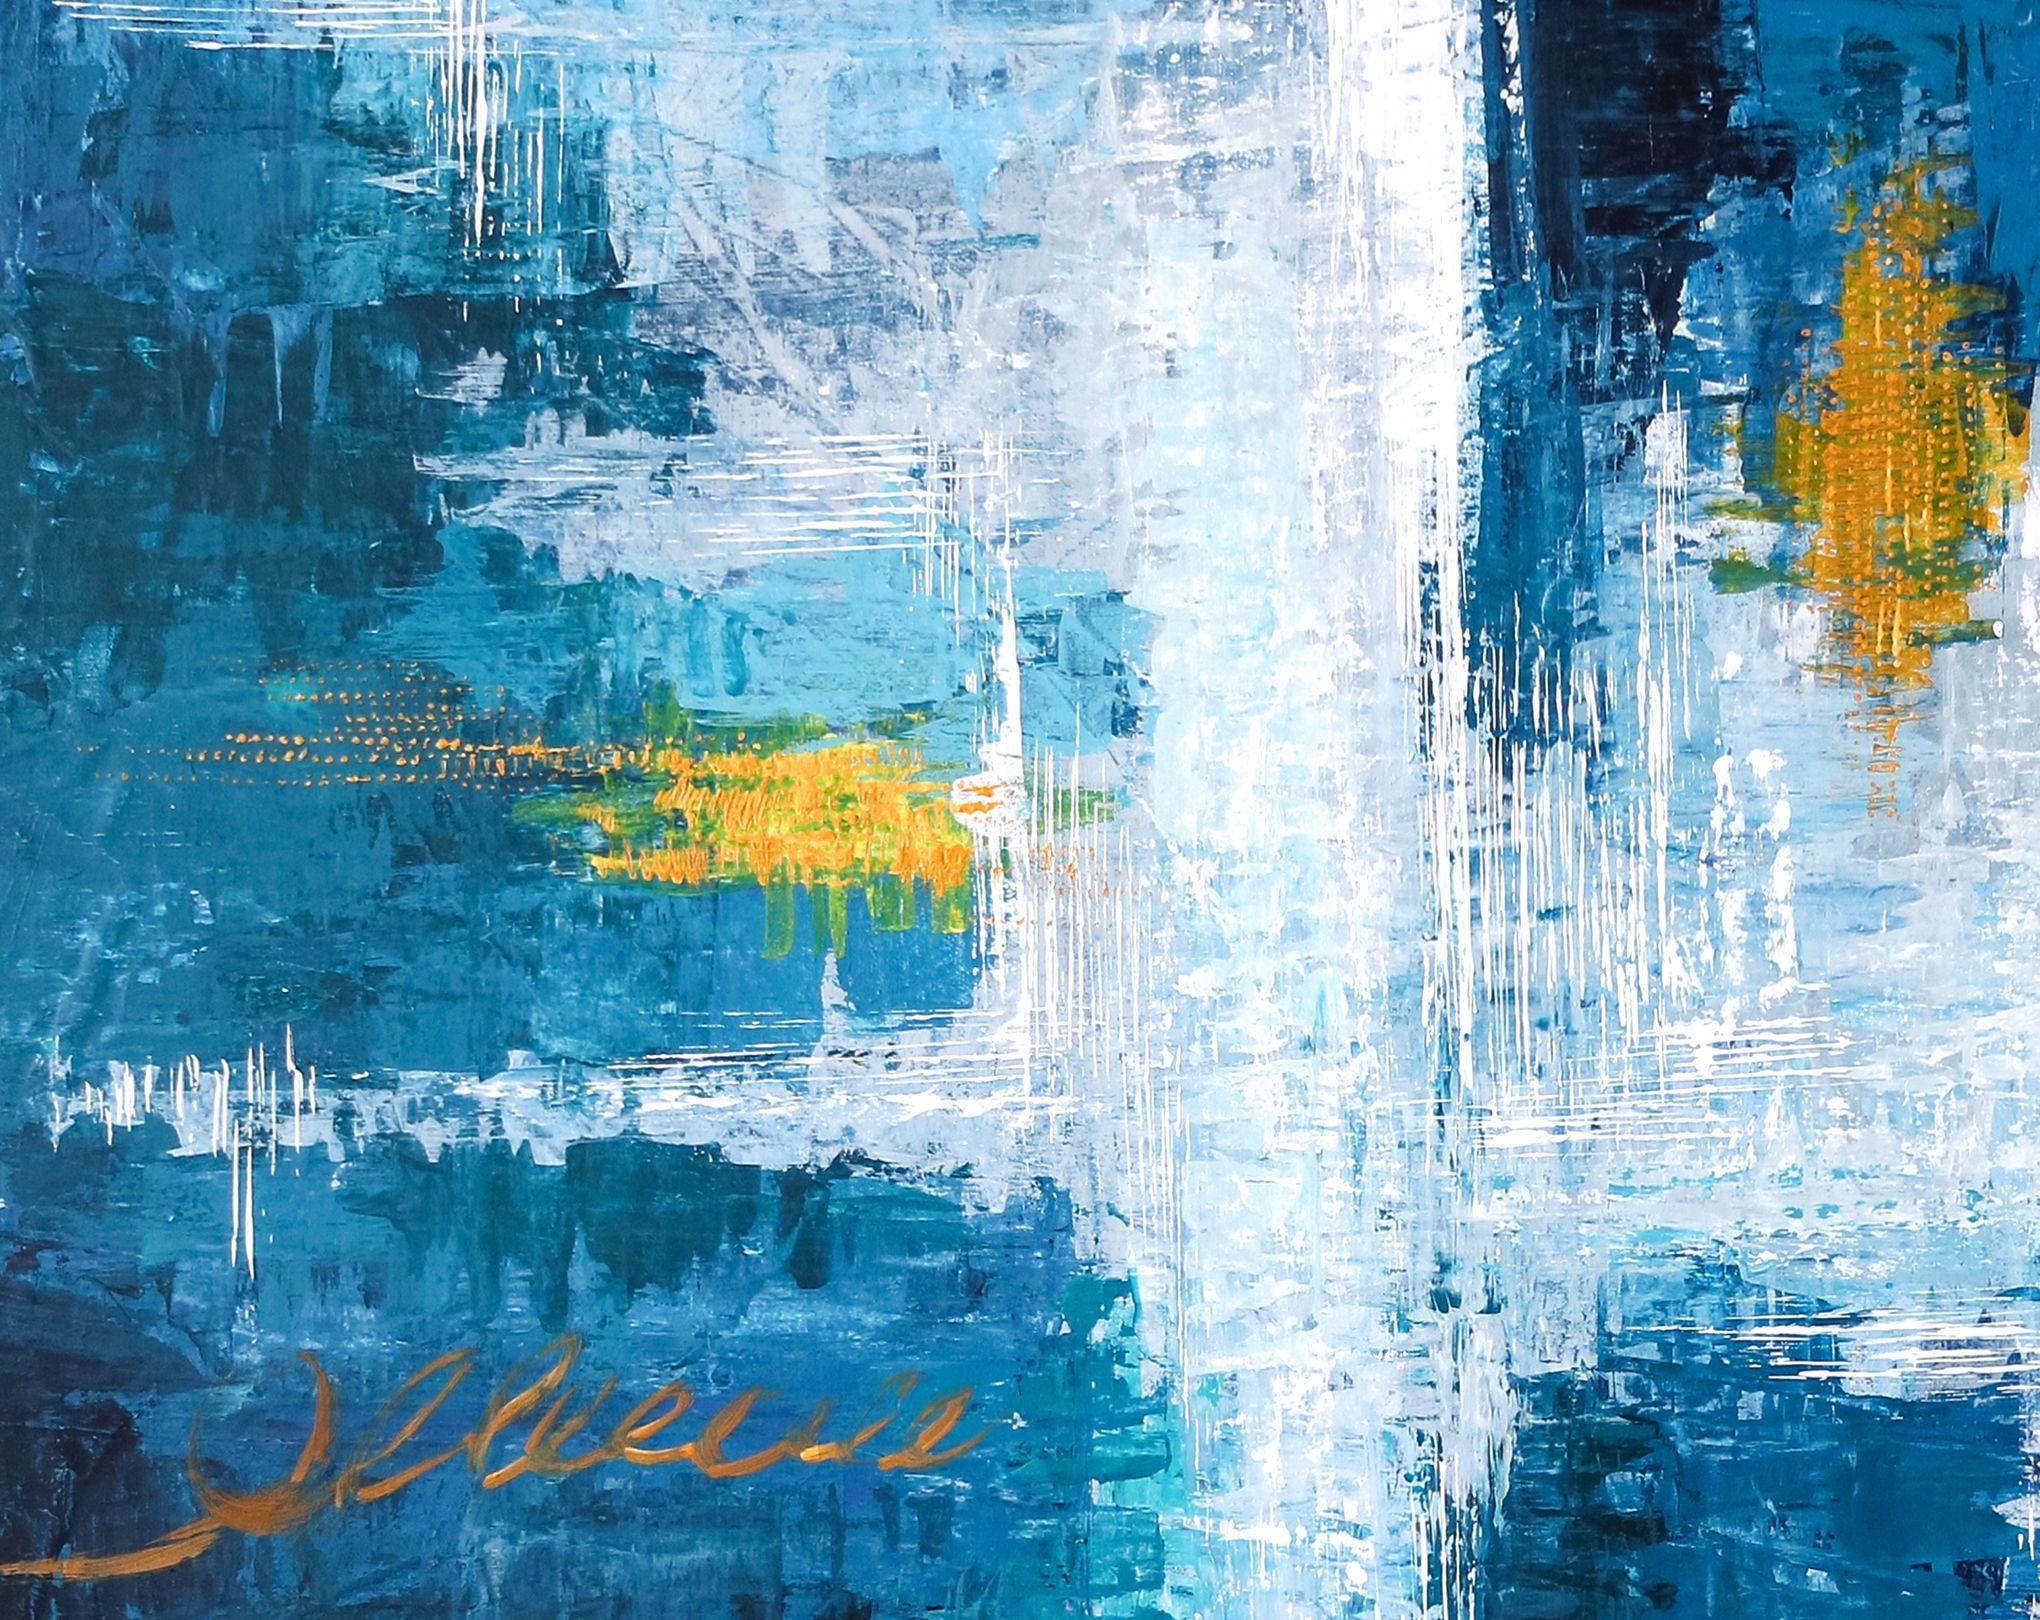 An depiction of sounding momentum in abstract expressionism with blue, white, yellow and orange. â€¢ PICTURE HANGER ATTACHED: Yes â€¢ SIDES PAINTED: Yes â€¢ READY TO HANG: Yes â€¢ ARTIST SIGNED: Yes â€¢ CERTIFICATE OF AUTHENTICITY: Yes, This is an